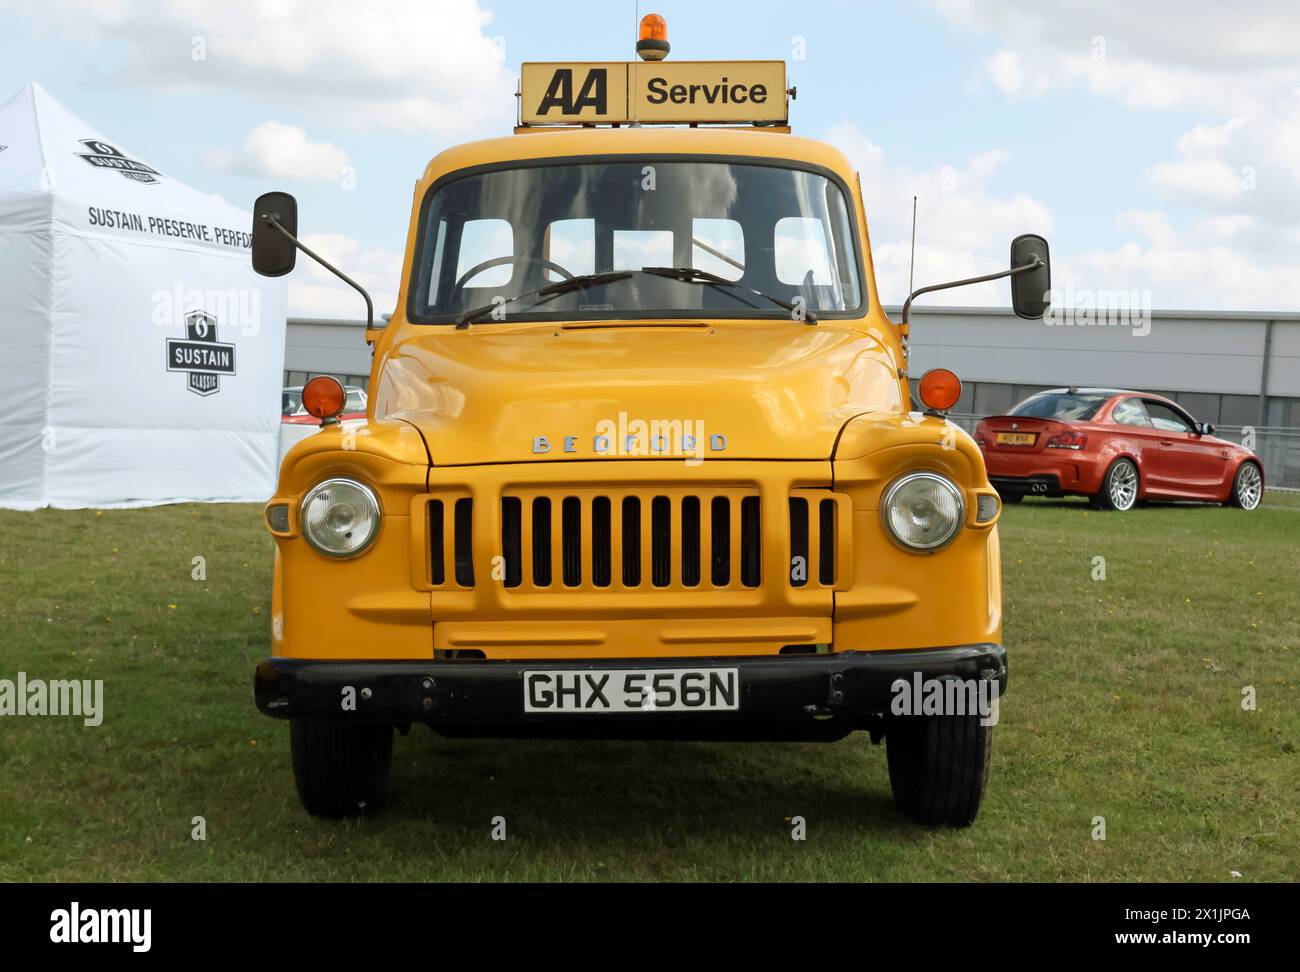 Front view of a Yellow, 1974 Bedford TJ J3,  Recovery Truck, part of the AA Heritage Fleet, on display at the 2023 British Motor Show Stock Photo